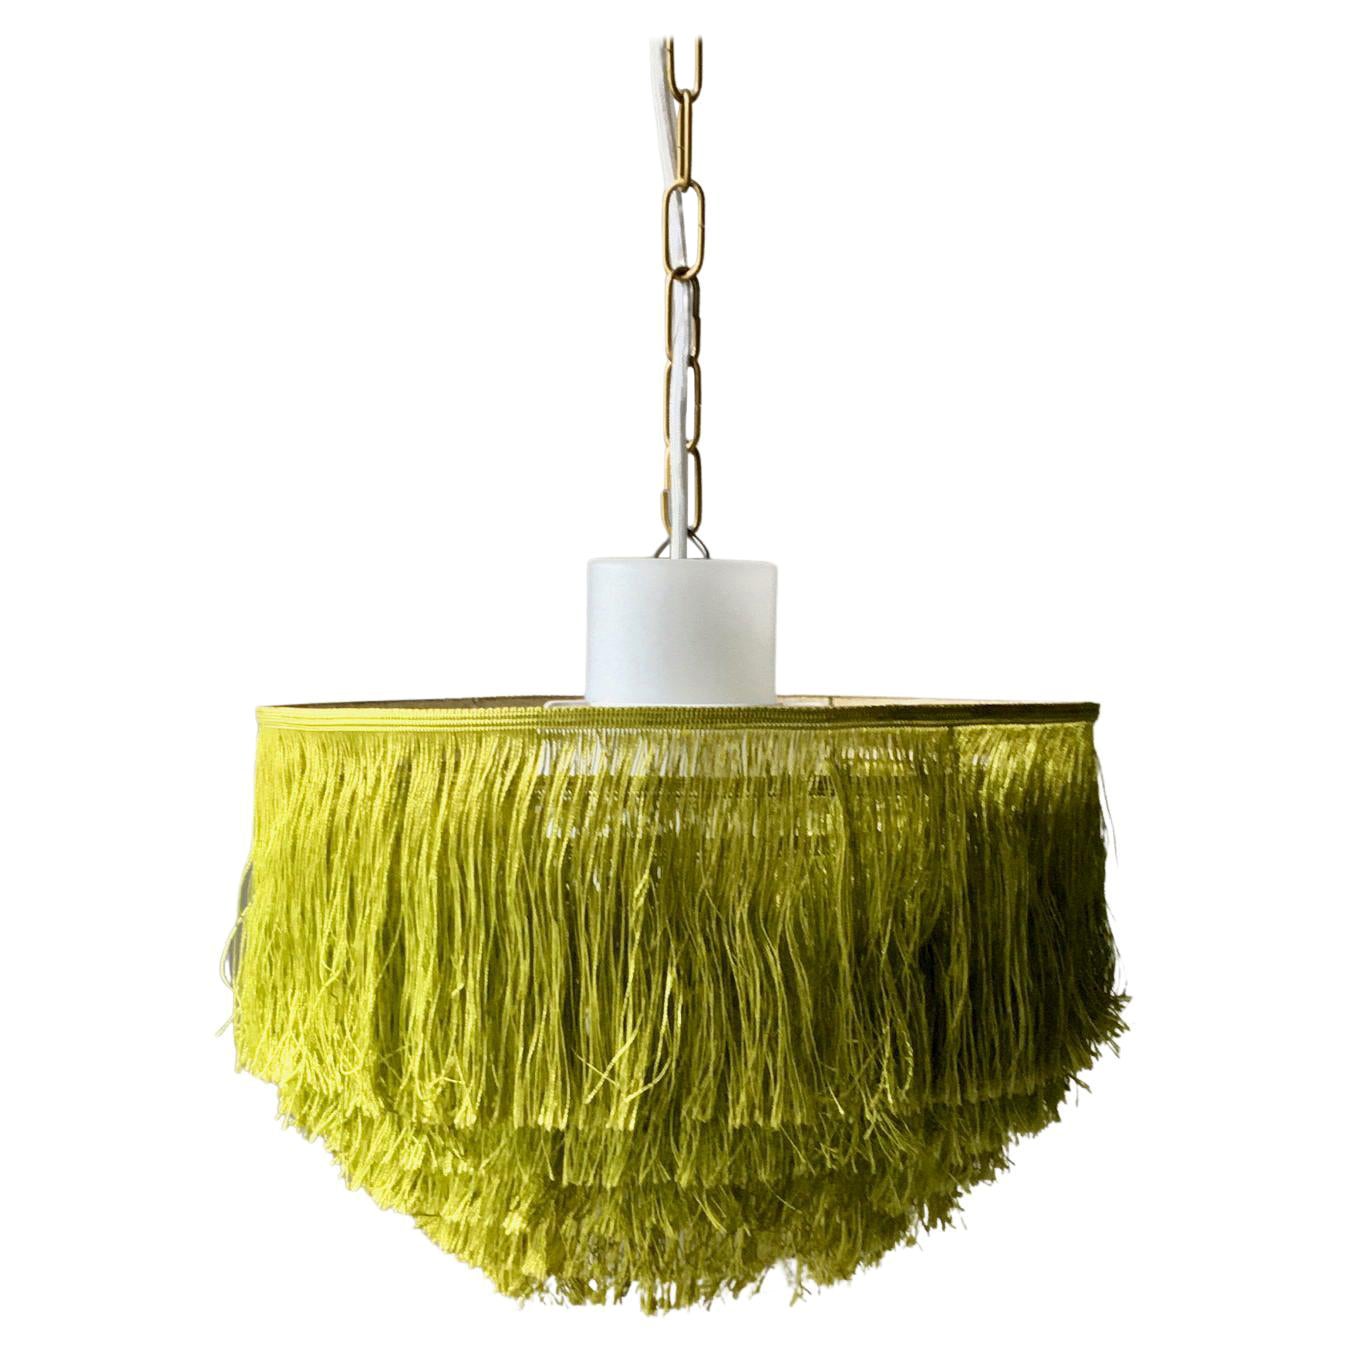 Green Fringe Light with Glass Liner By Hans-Agne Jakobsson, Sweden '2 Available' For Sale